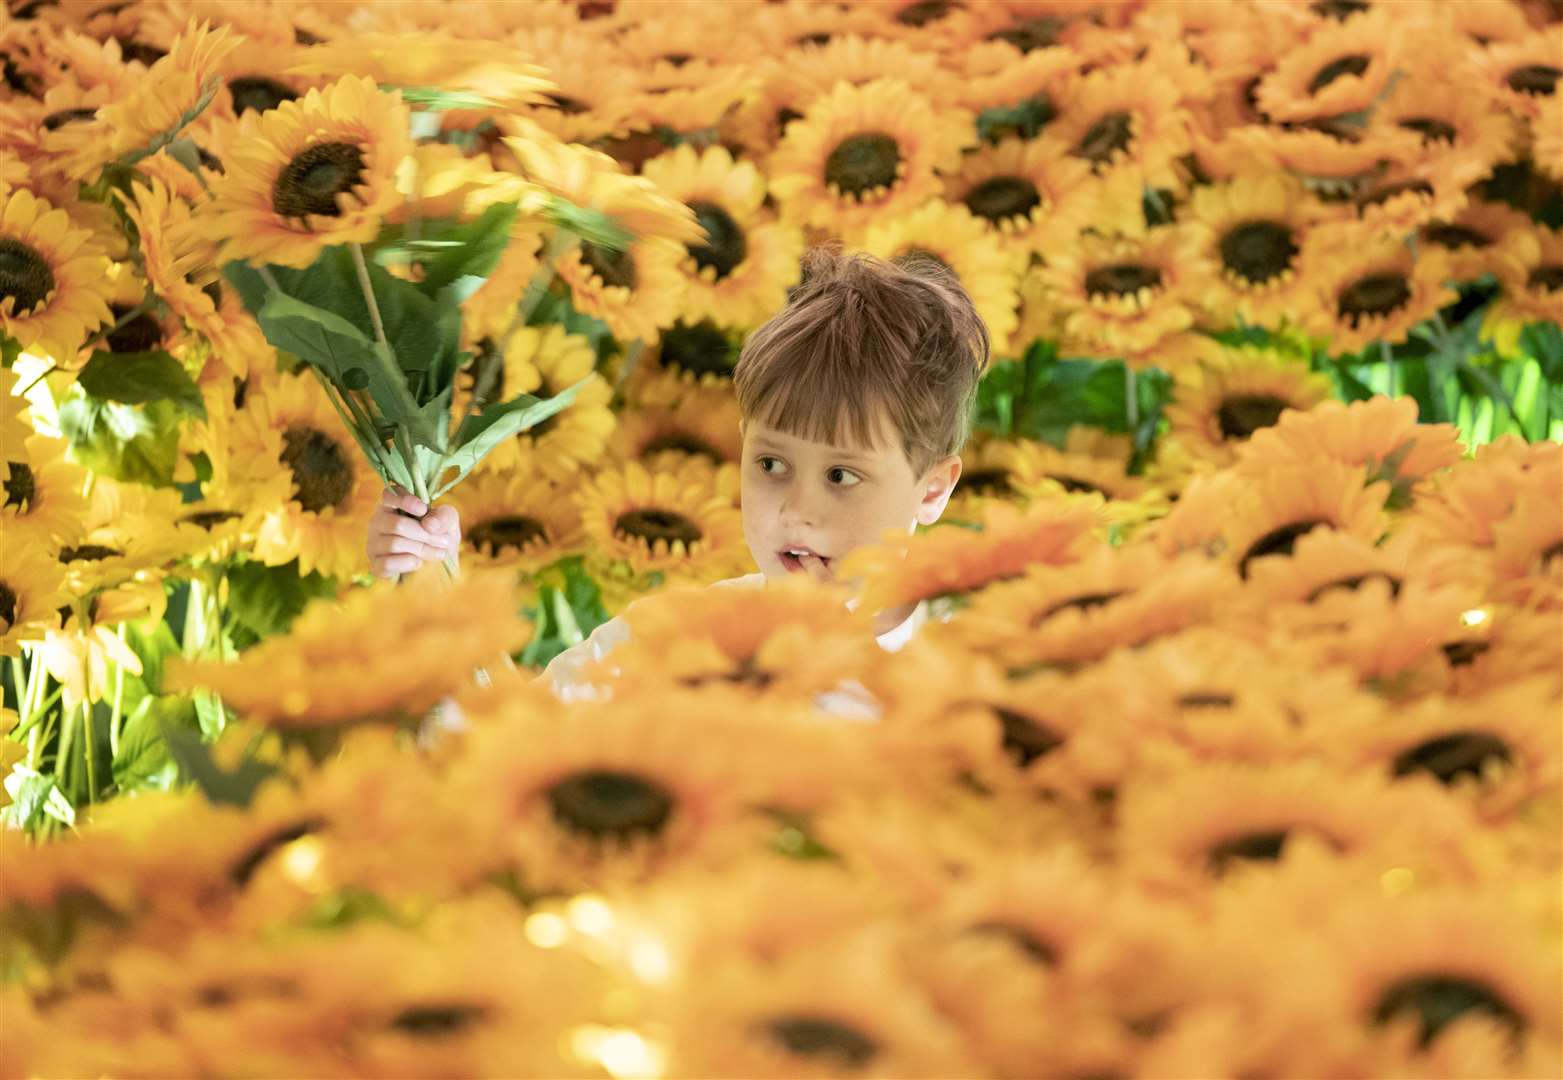 Five-year-old Lenny Boyd peeked out of the sunflowers at an immersive Van Gogh exhibition in Edinburgh in March (Jane Barlow)